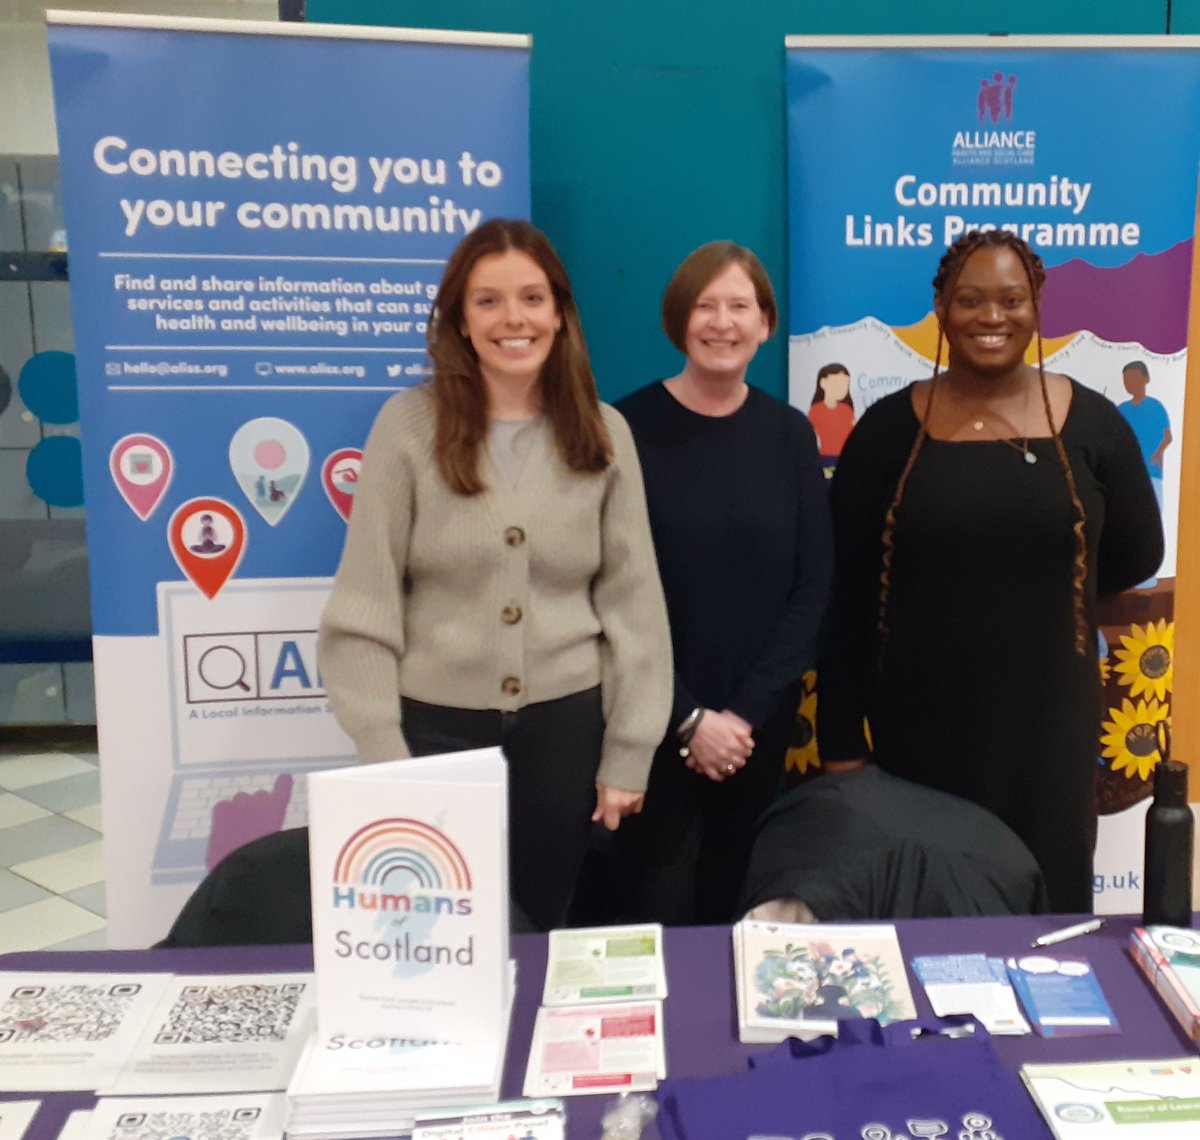 3 of our new CLPs meeting with many other community organisations today @glasgowlife  #makeslinks